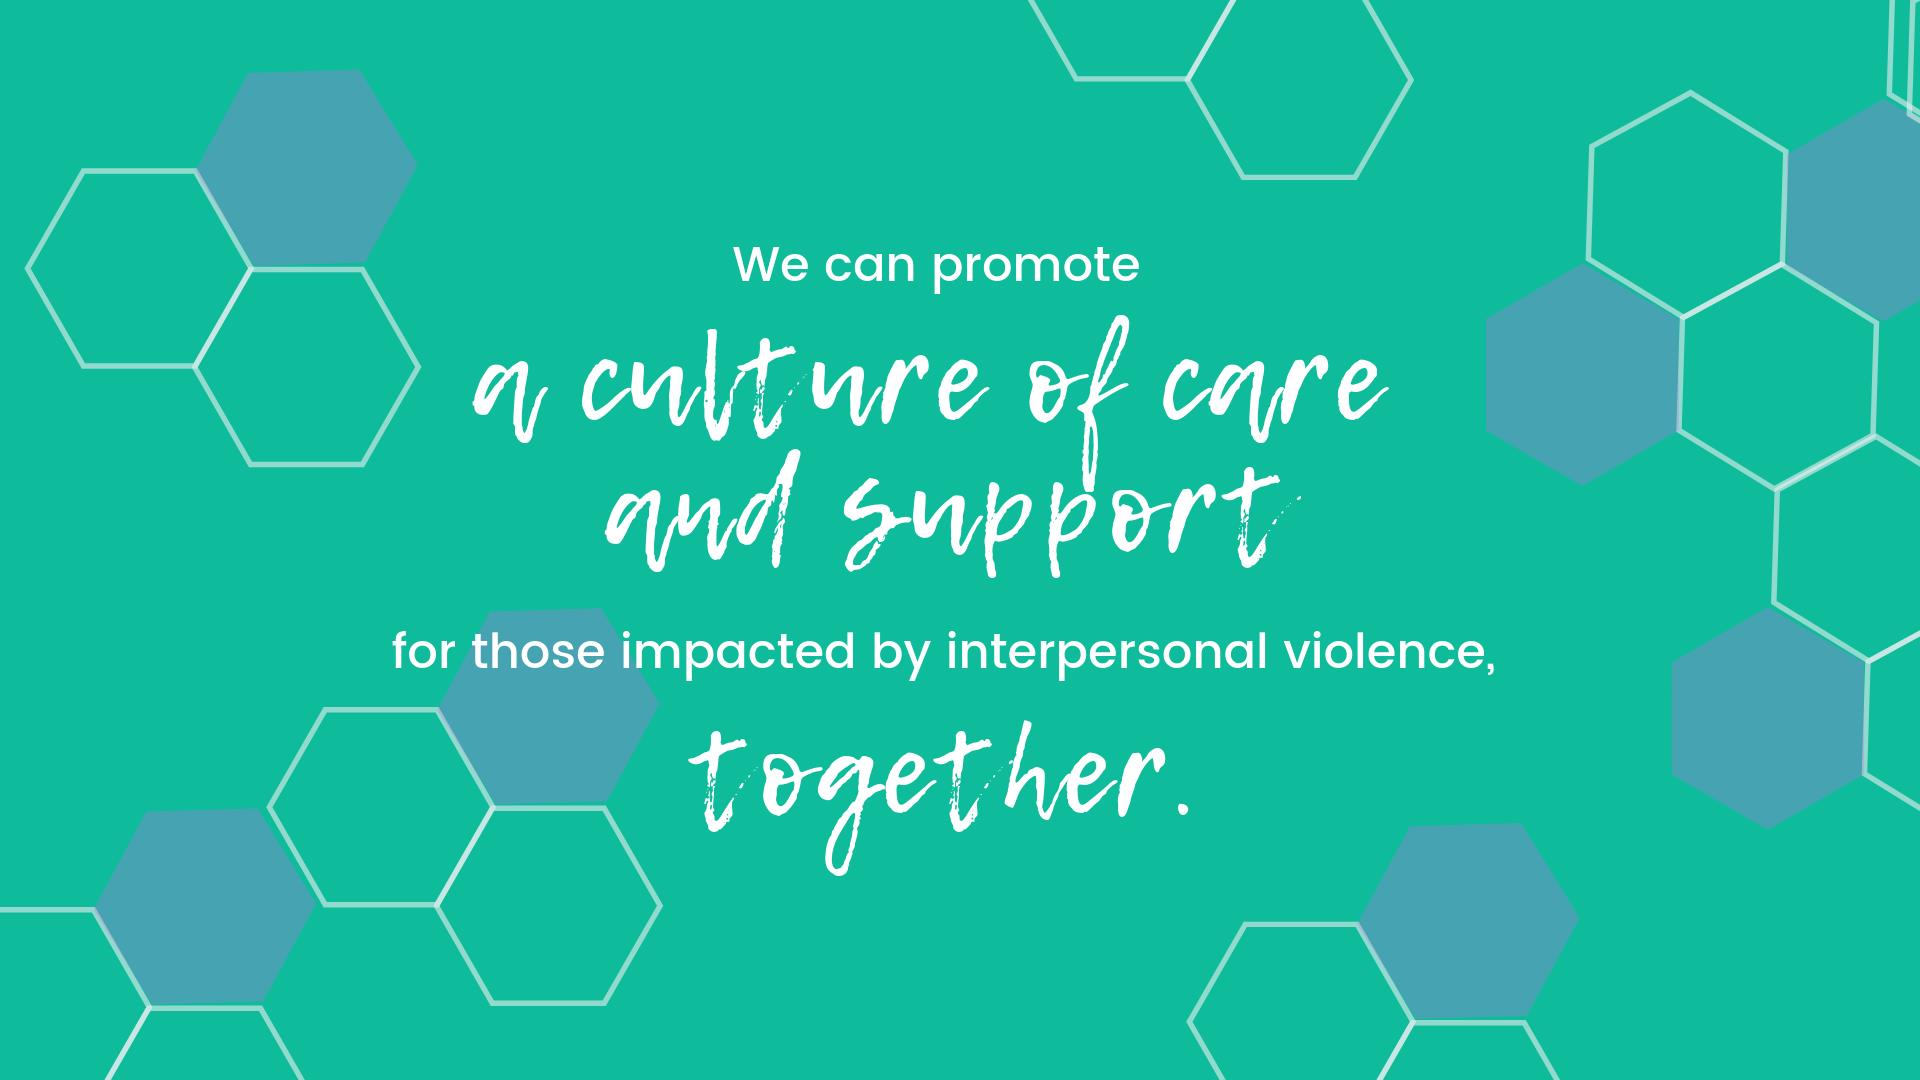 We can promote a culture of care and support for those impacted by interpersonal violence, together.